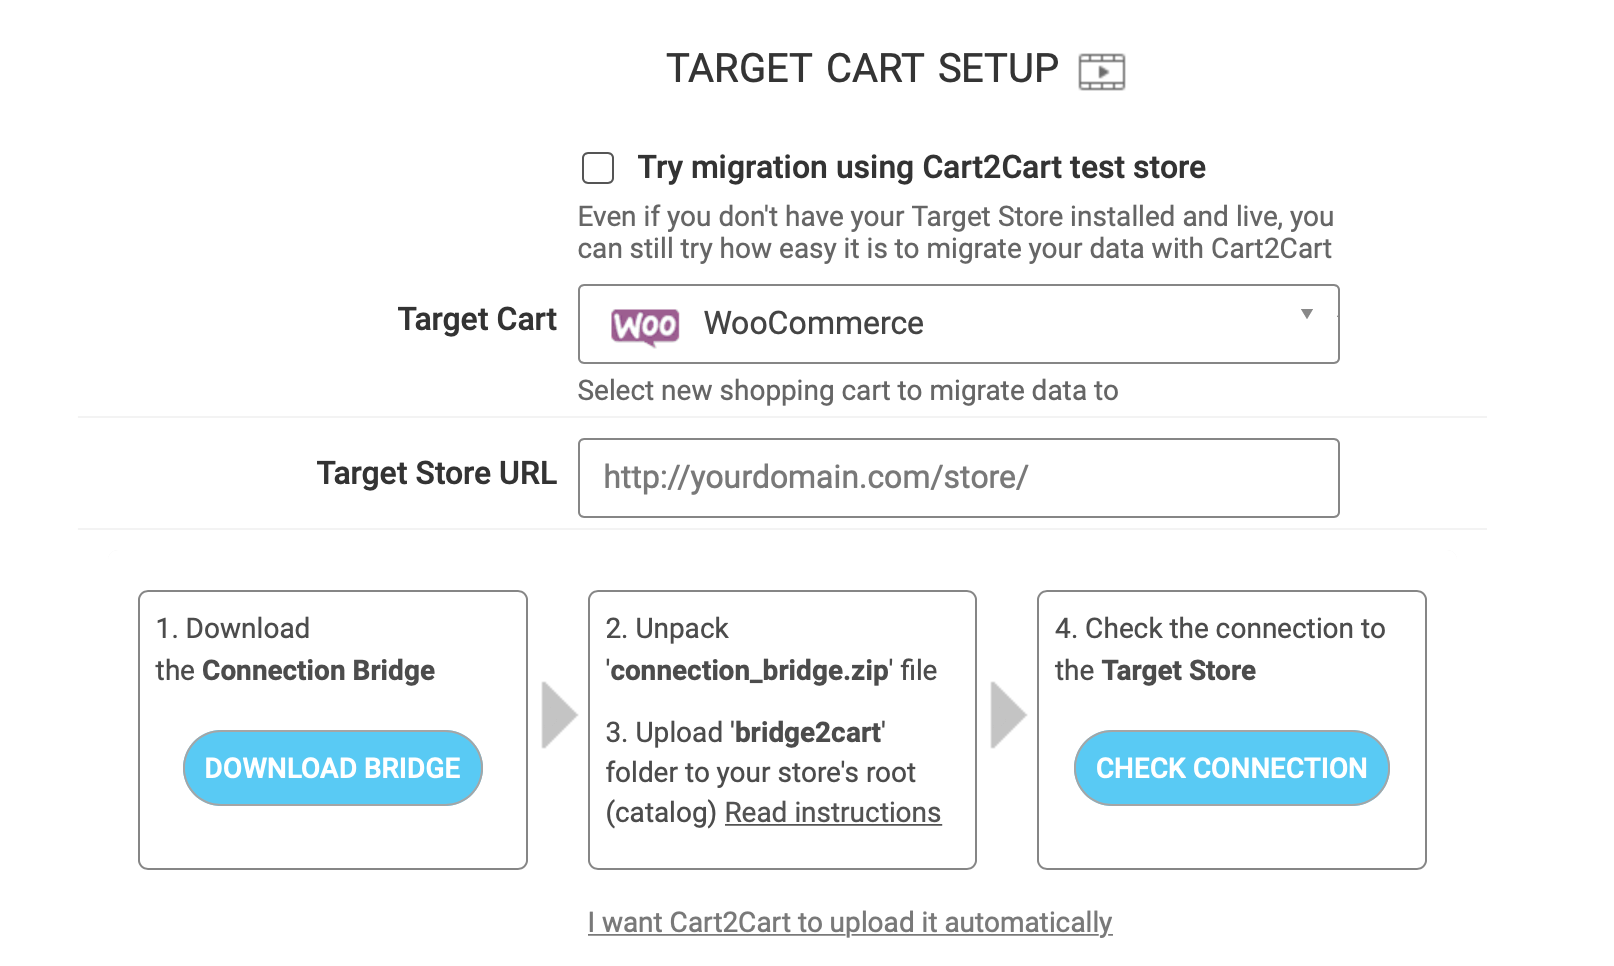 The Cart2Cart Target Cart Setup input screen to migrate Shopify to WooCommerce